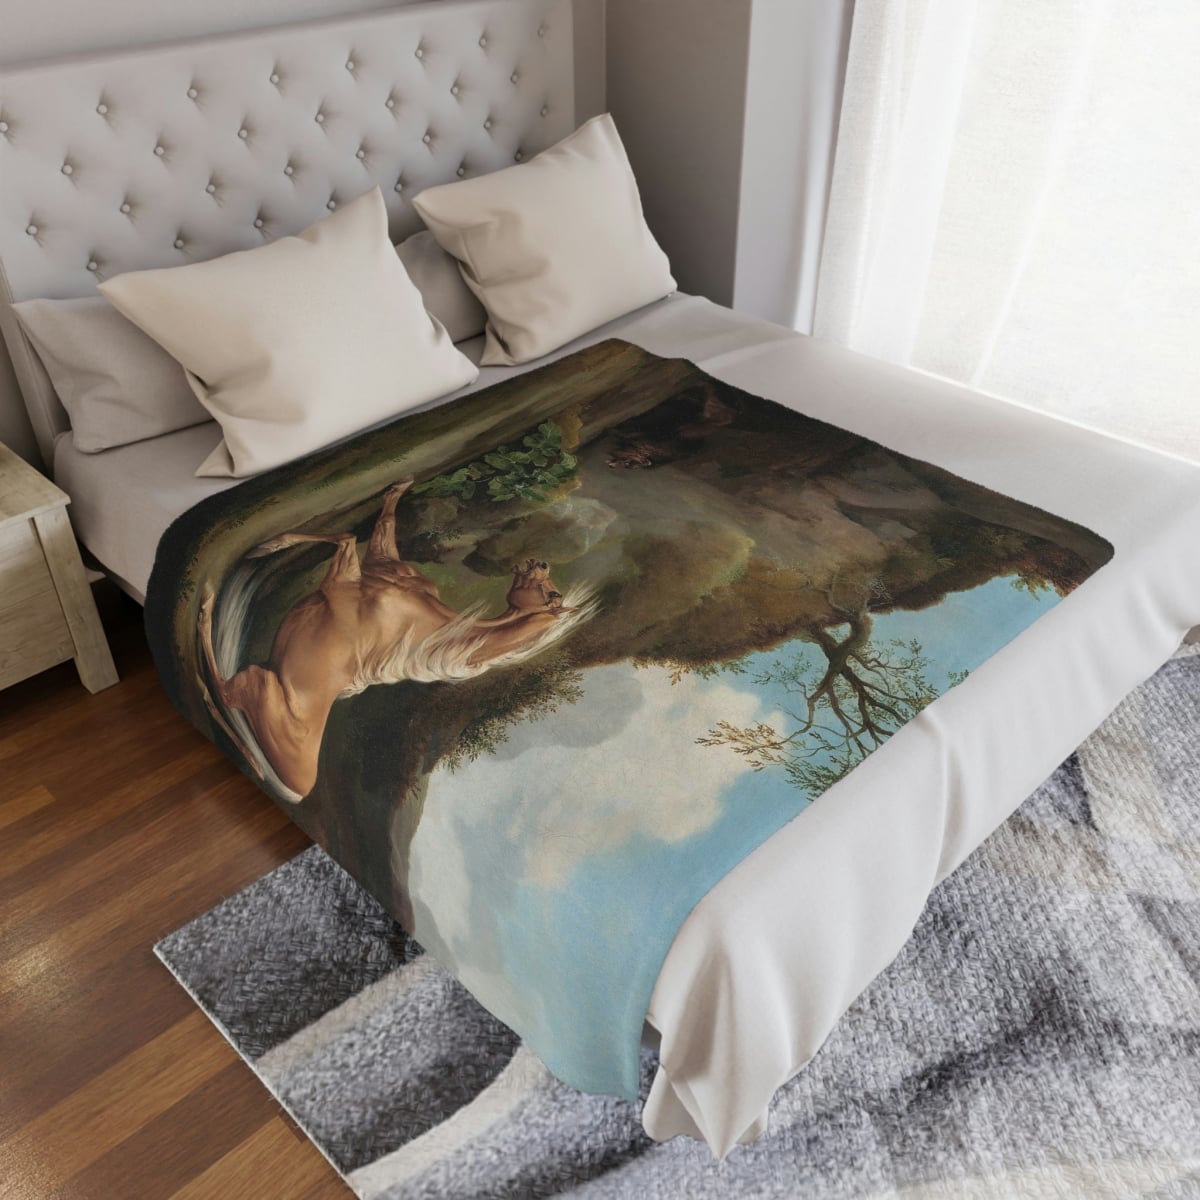 Luxurious Art-Inspired Blanket for Art Enthusiasts